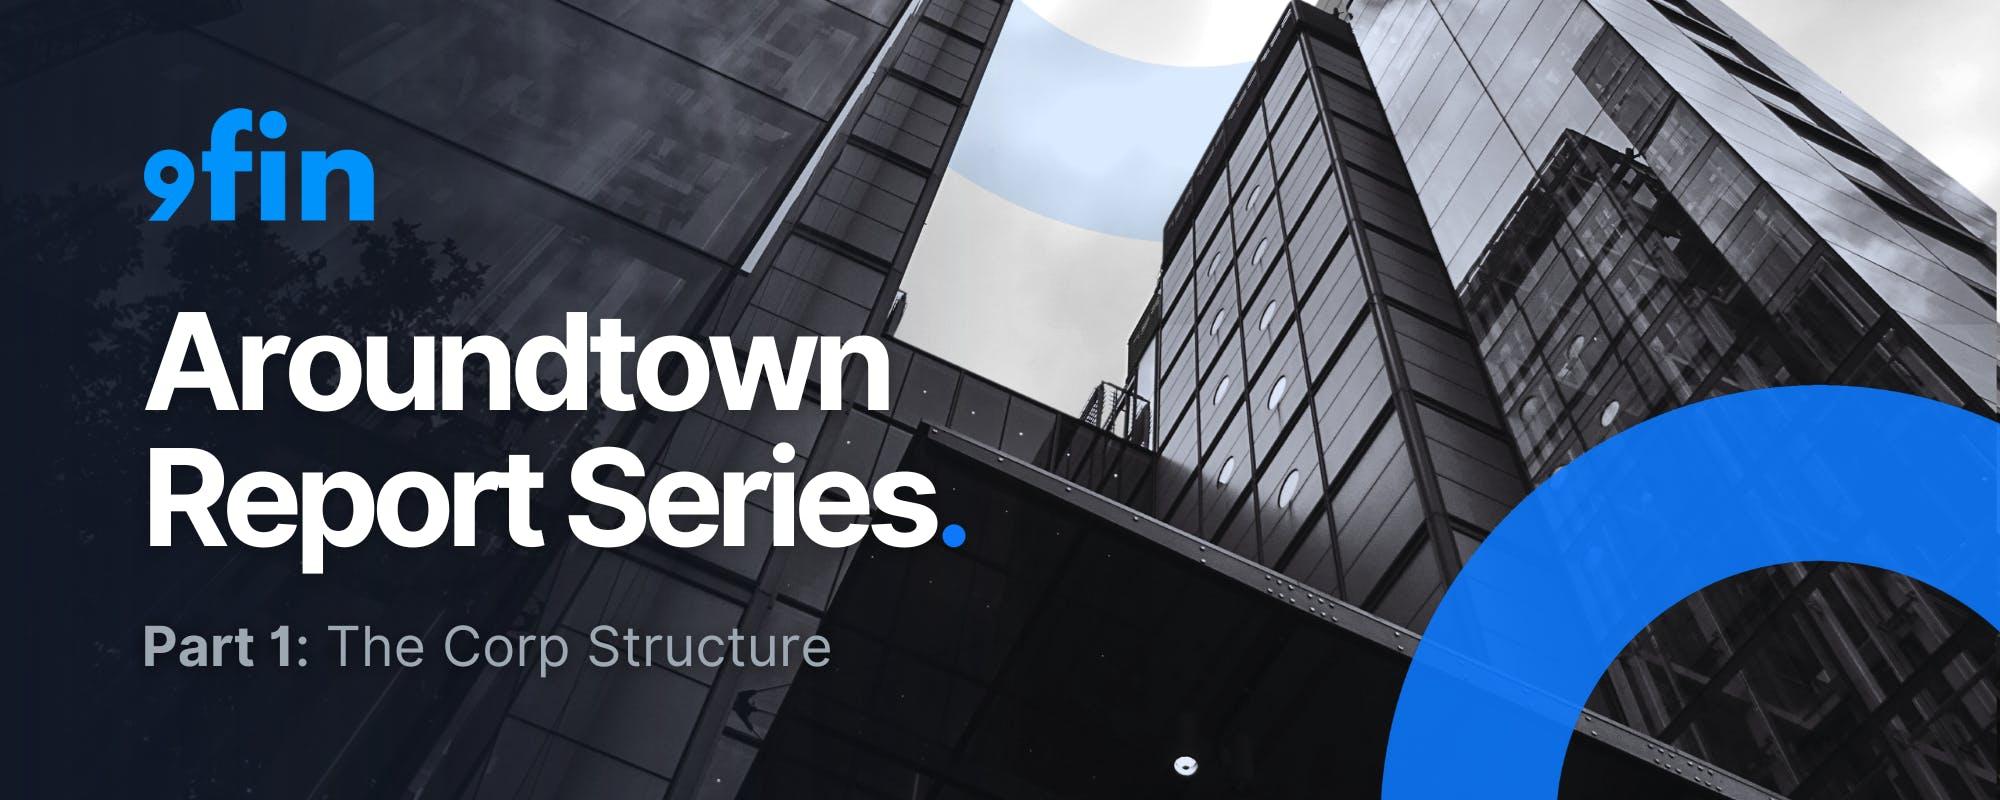 Aroundtown Report Series Part 1 – The Corp Structure